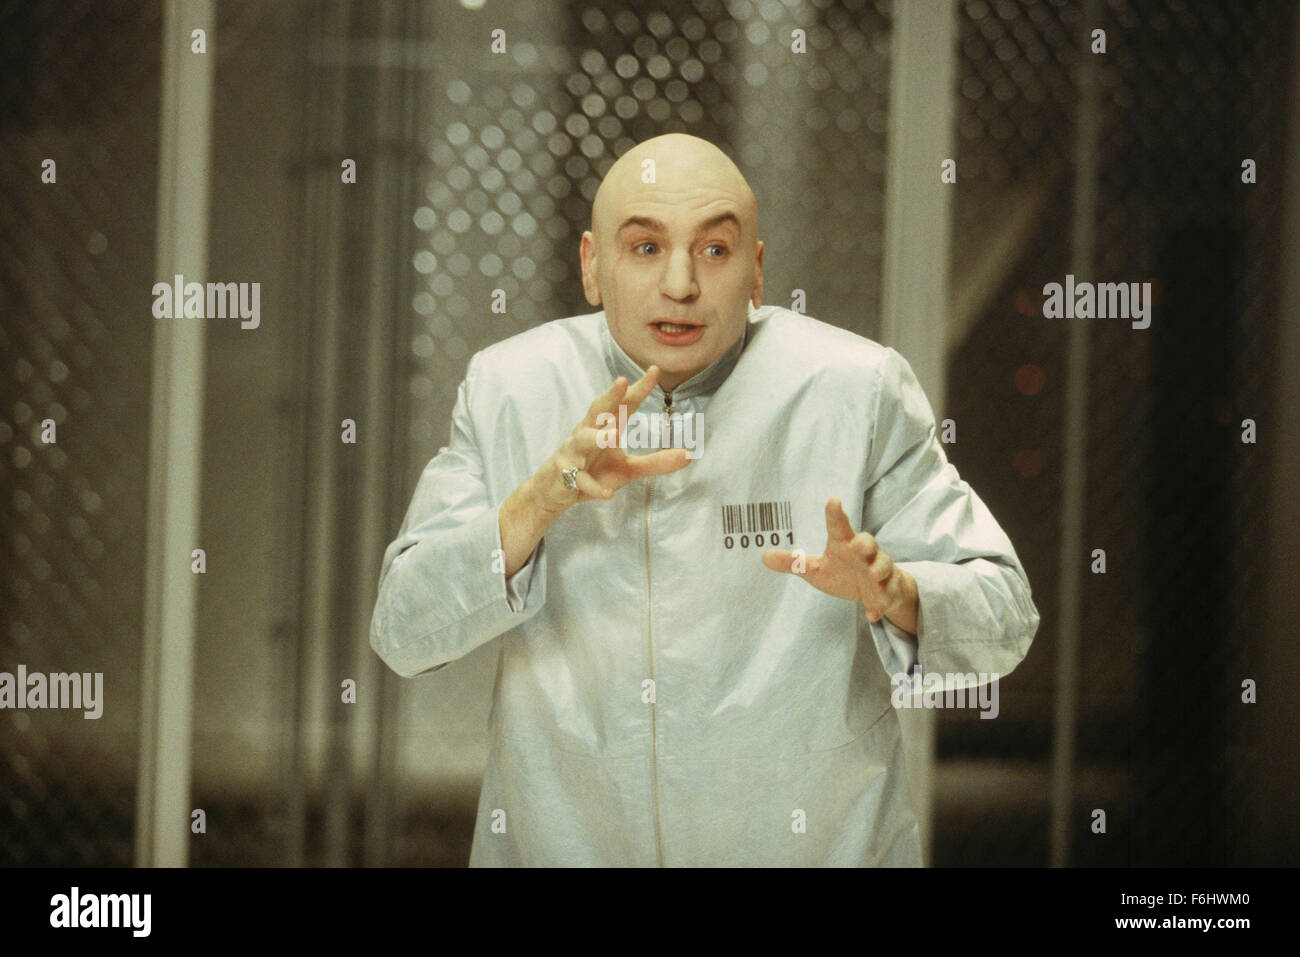 RELEASE DATE: July 26, 2002. MOVIE TITLE: Austin Powers in Goldmember. STUDIO: New Line Cinema. PLOT: Upon learning that his father has been kidnapped, Austin Powers must travel to 1975 and defeat the aptly-named villain Goldmember - who is working with Dr. Evil. PICTURED: MIKE MYERS. Stock Photo